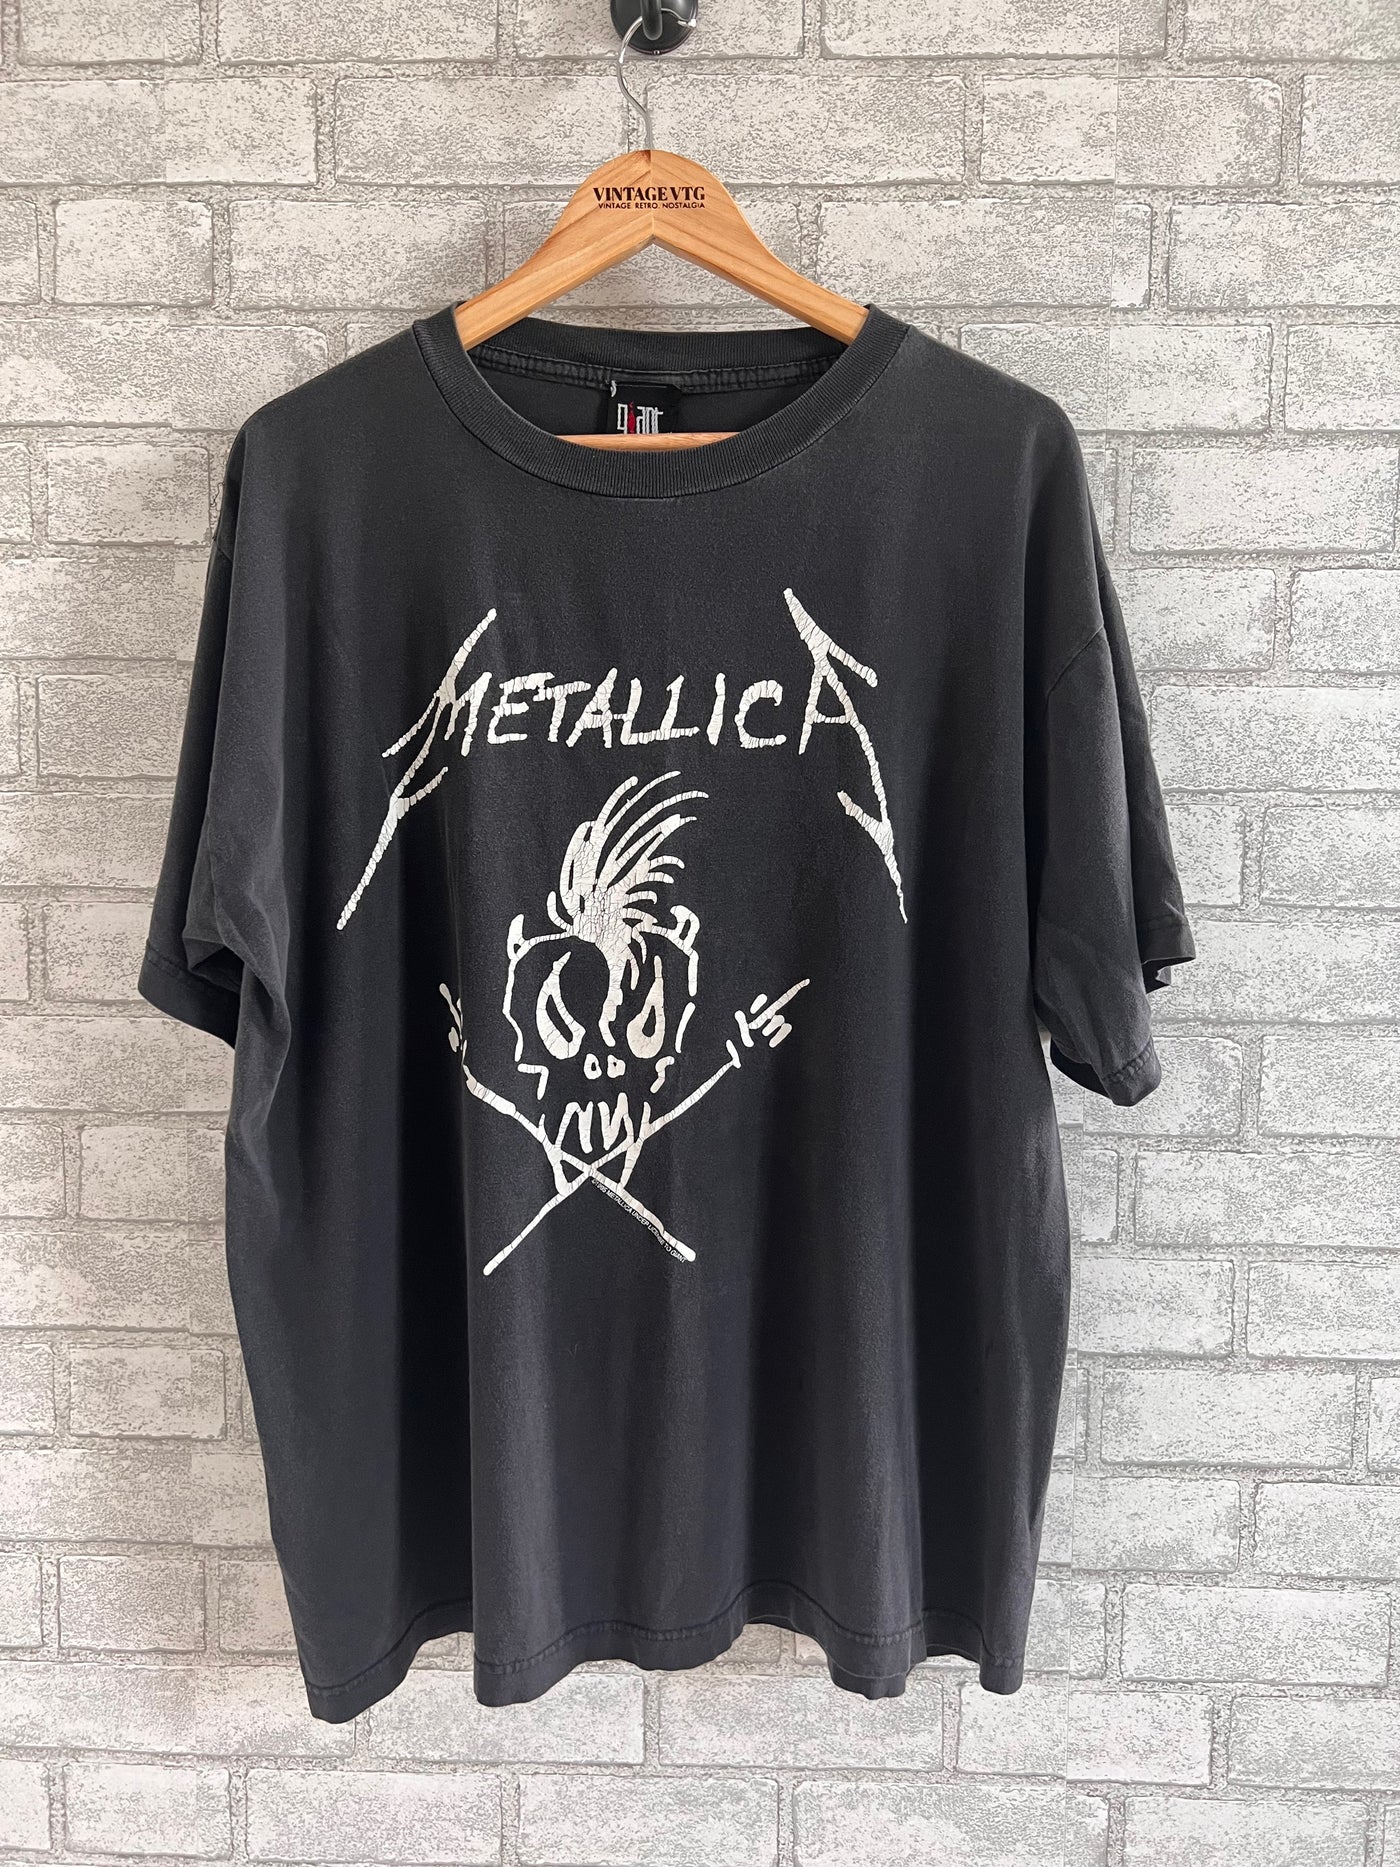 Rare Vintage Metallica 1994 Metallica "Been There Done That" Shirt. XL